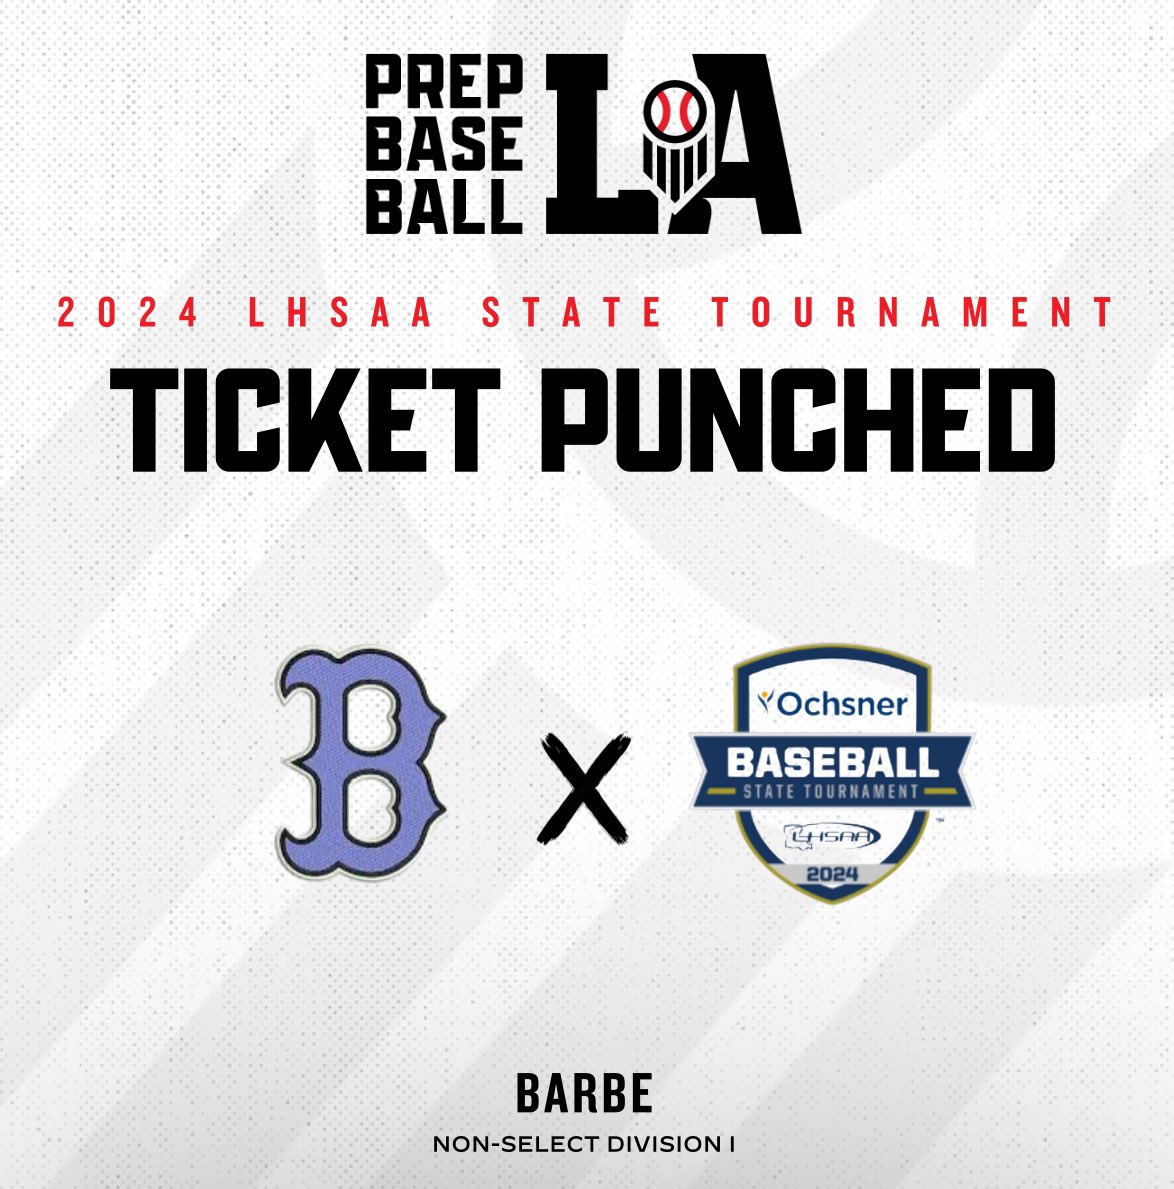 🎟️ 𝐓𝐢𝐜𝐤𝐞𝐭 𝐏𝐮𝐧𝐜𝐡𝐞𝐝 We’ll see the Non-Select Division I #1 seed Barbe in Sulphur, LA next week for the 2024 @LHSAAsports State Tournament! #BeSeen @prepbaseball | @AlexArmandPBR